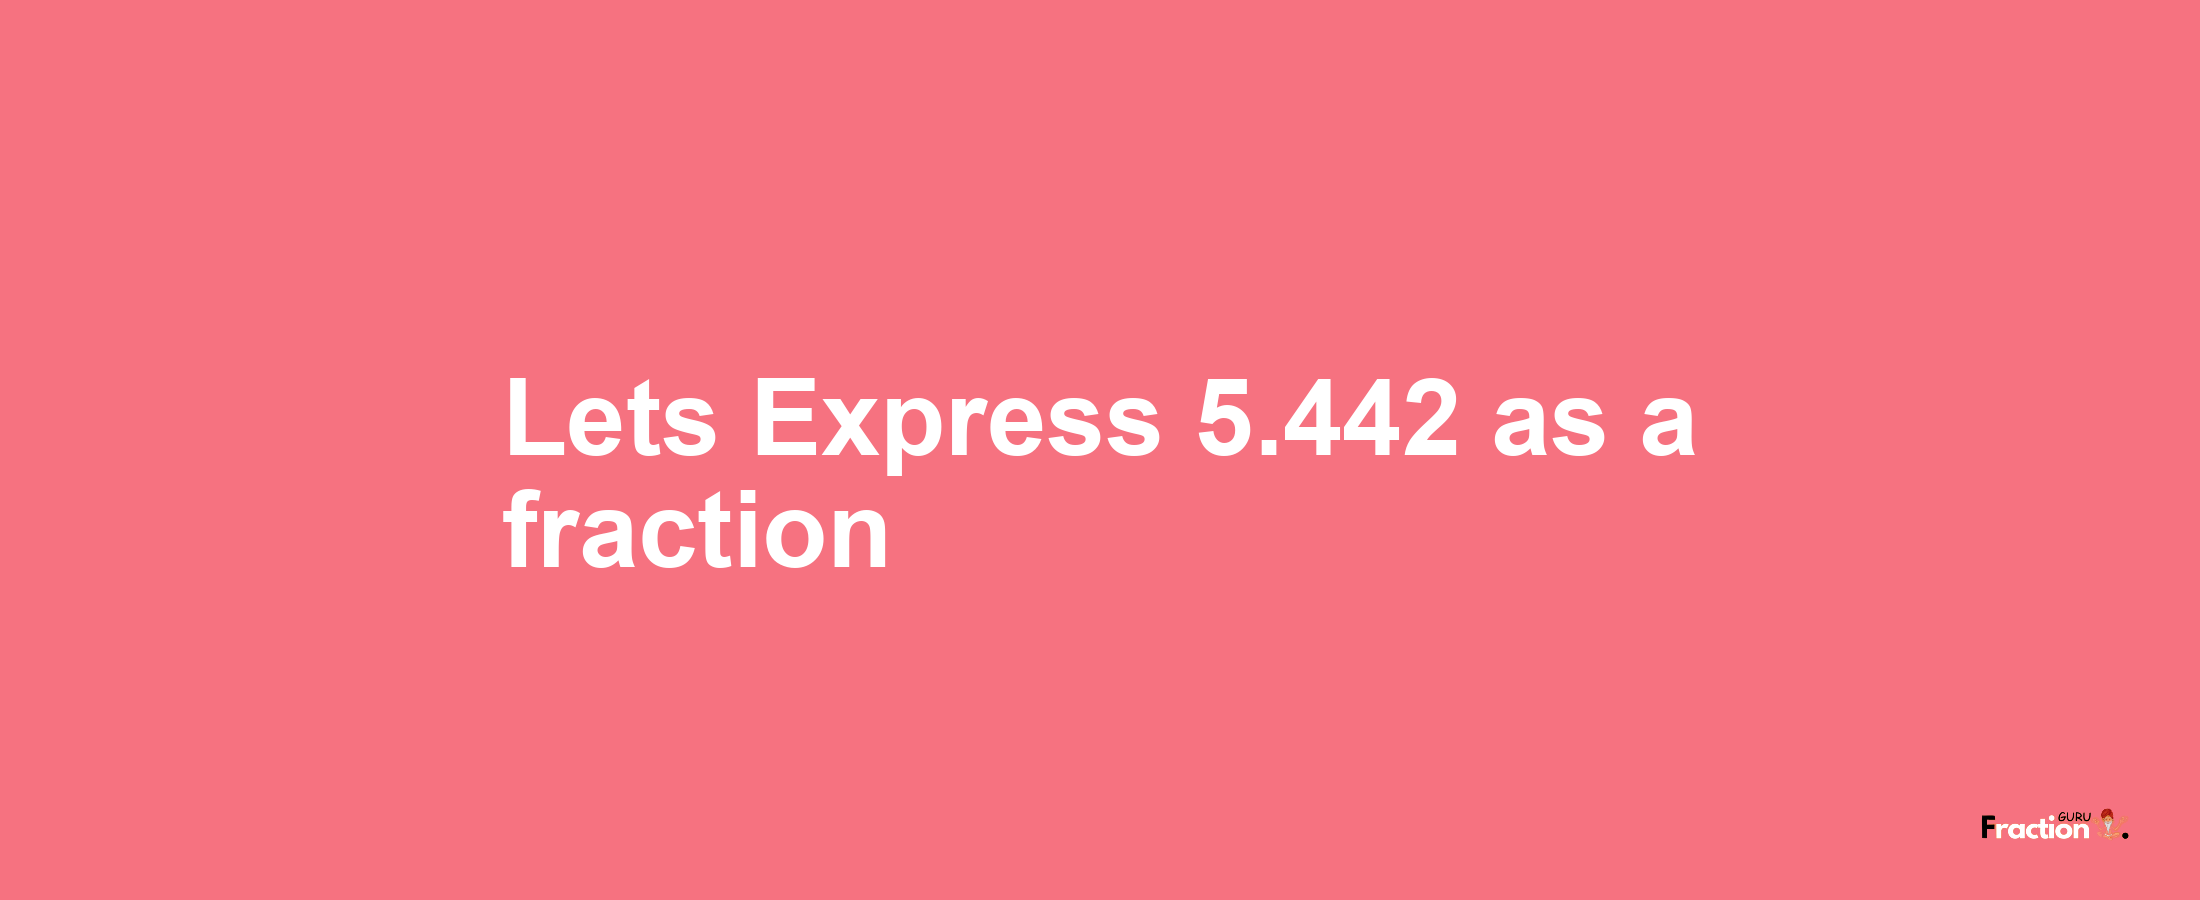 Lets Express 5.442 as afraction